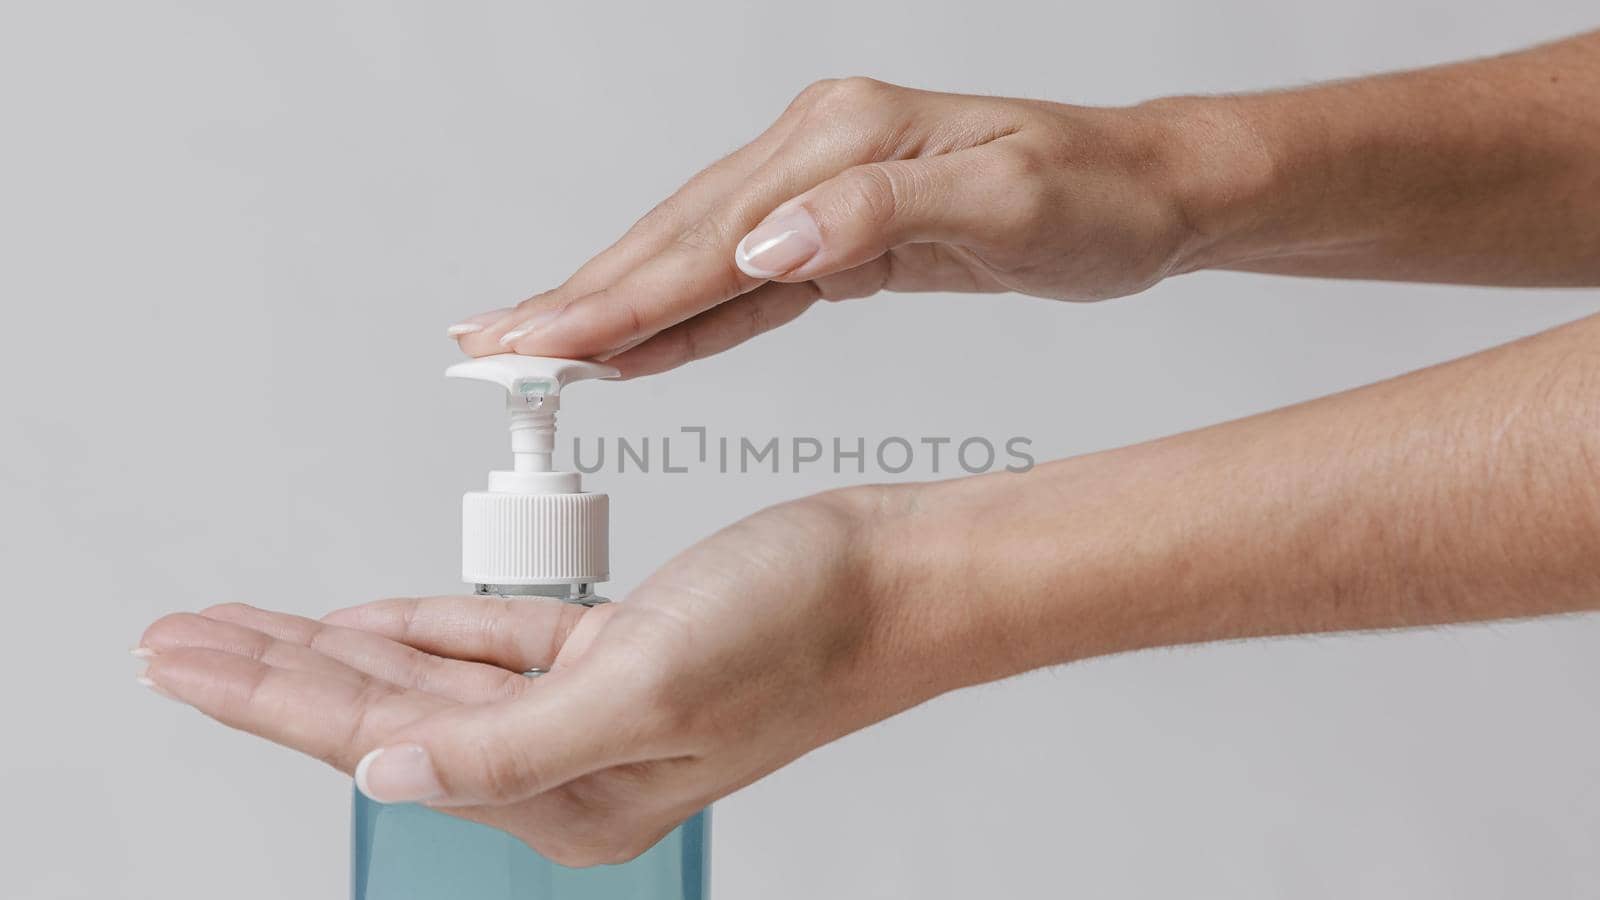 using gel hydroalcoolique hand sanitizer. High quality beautiful photo concept by Zahard